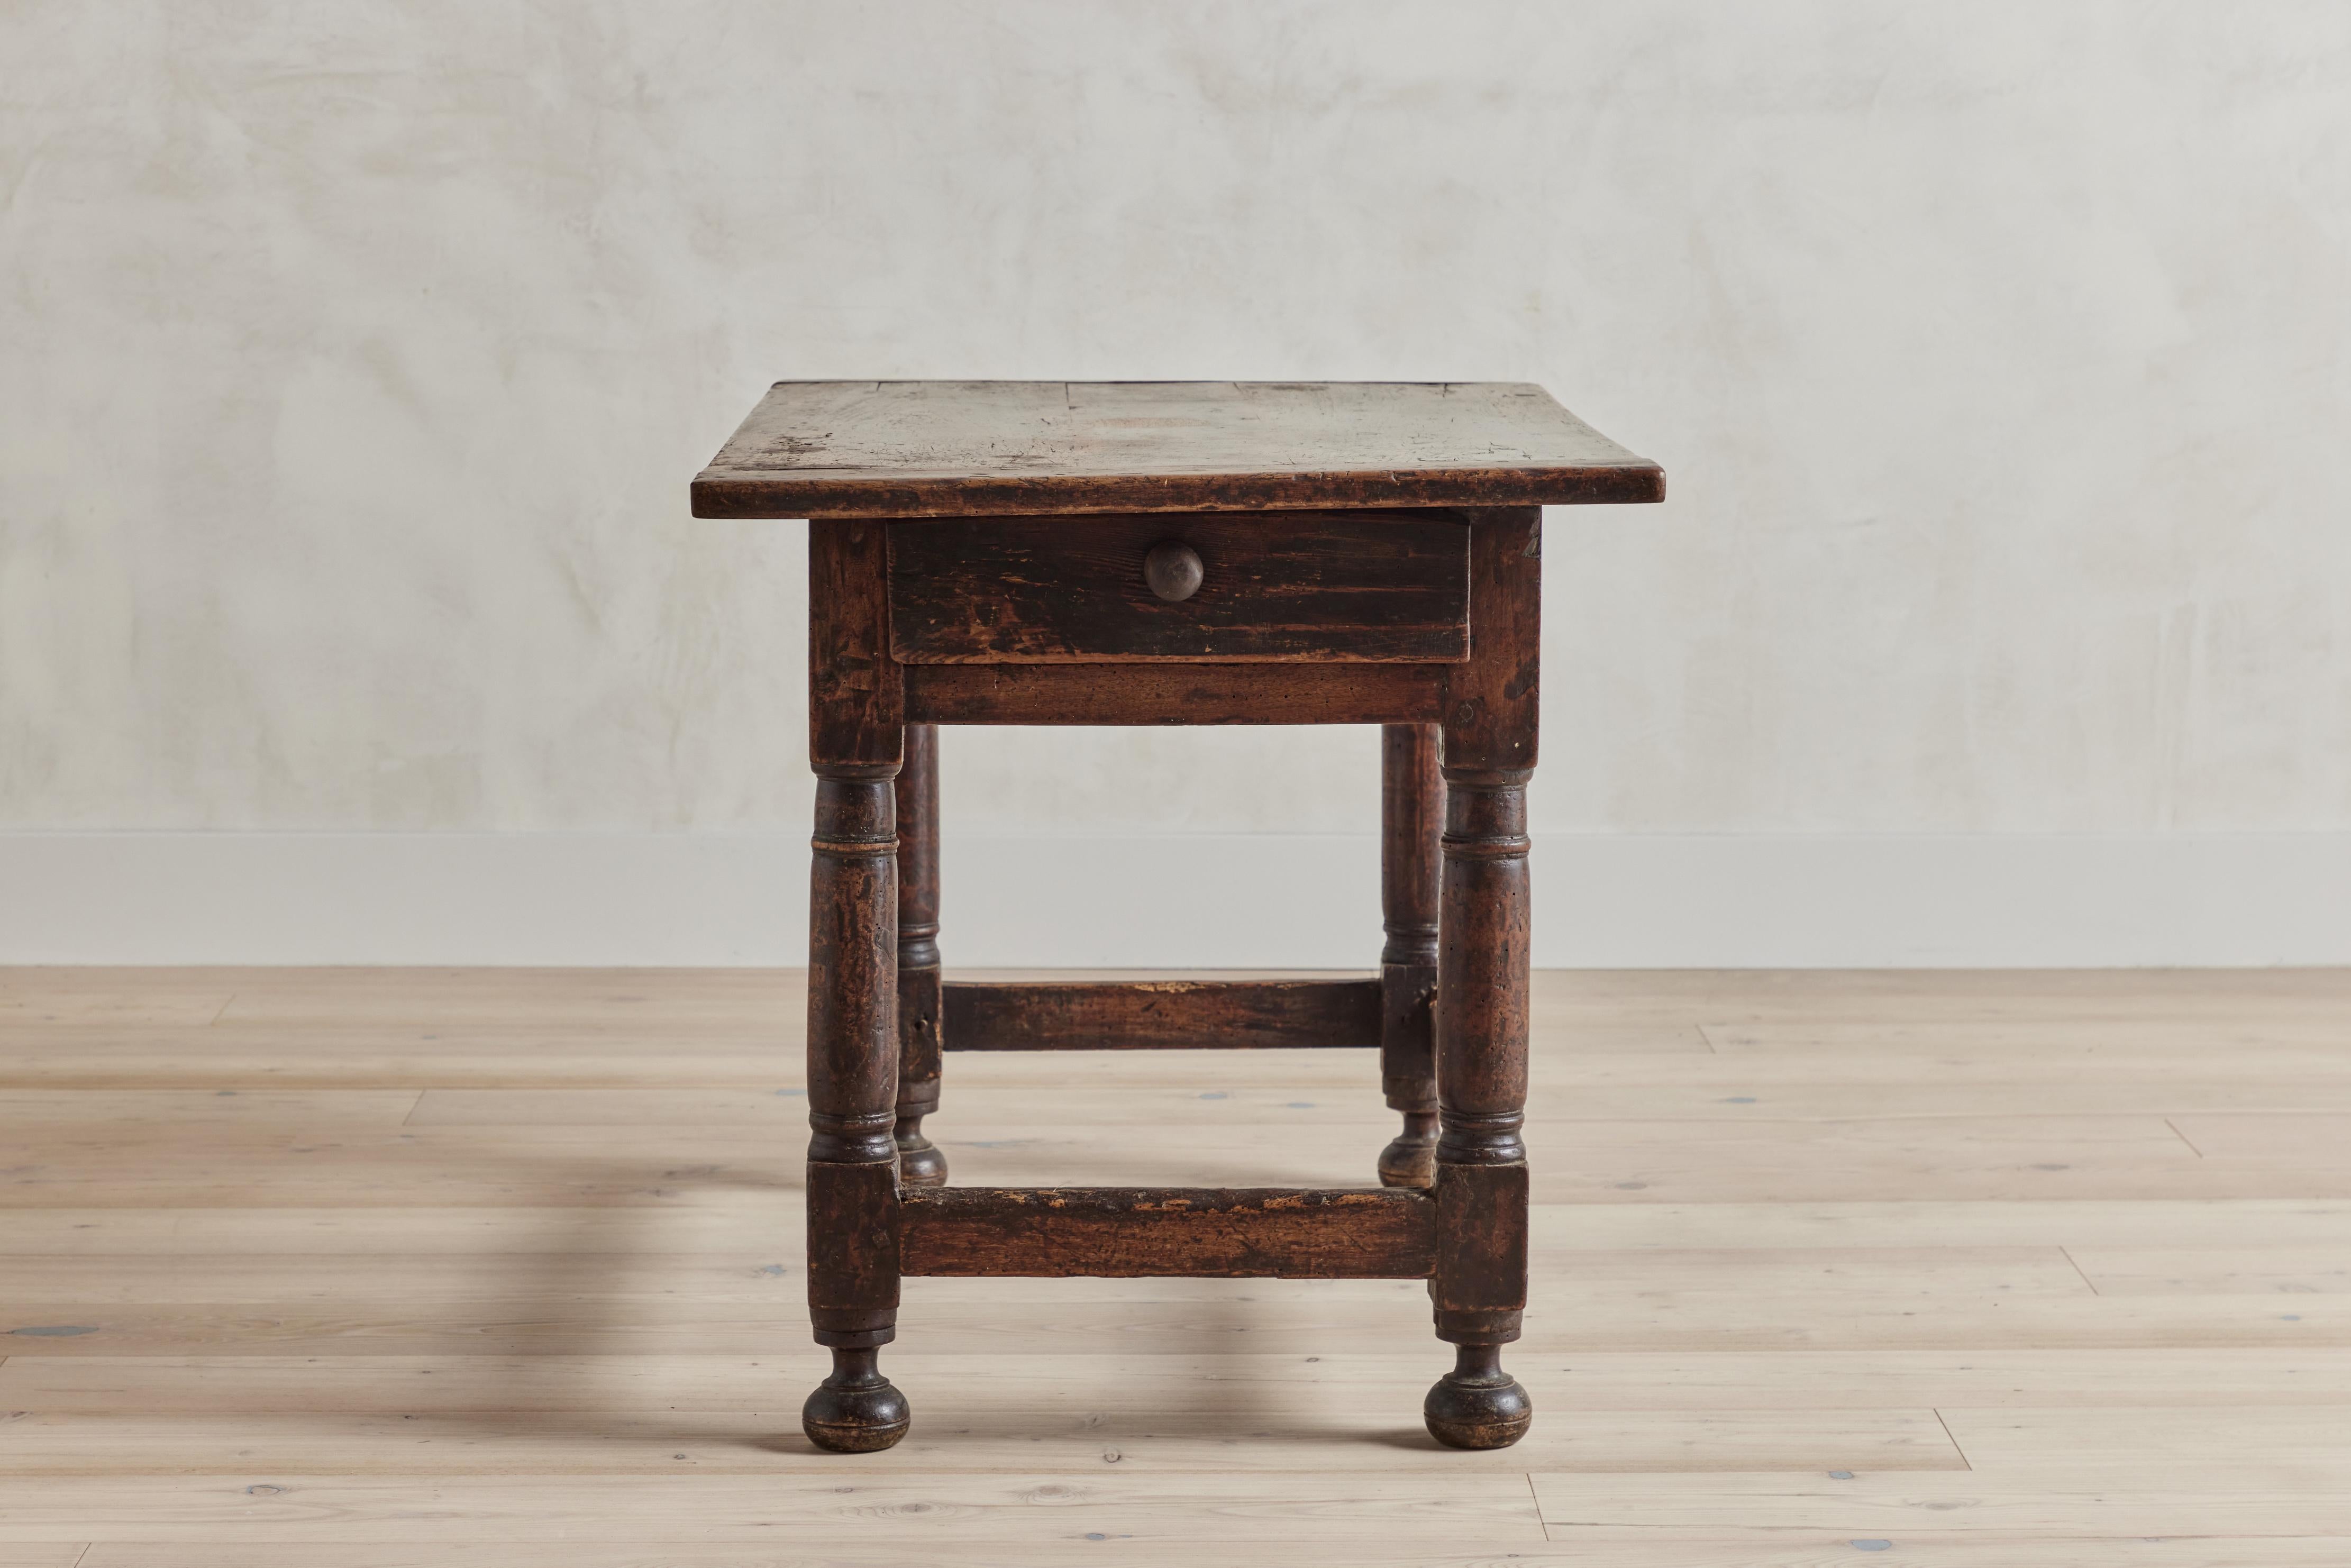 19th century hall table from France with turned wood legs on bun feet. This table features a single drawer. Wood shows visible wear from age and use.